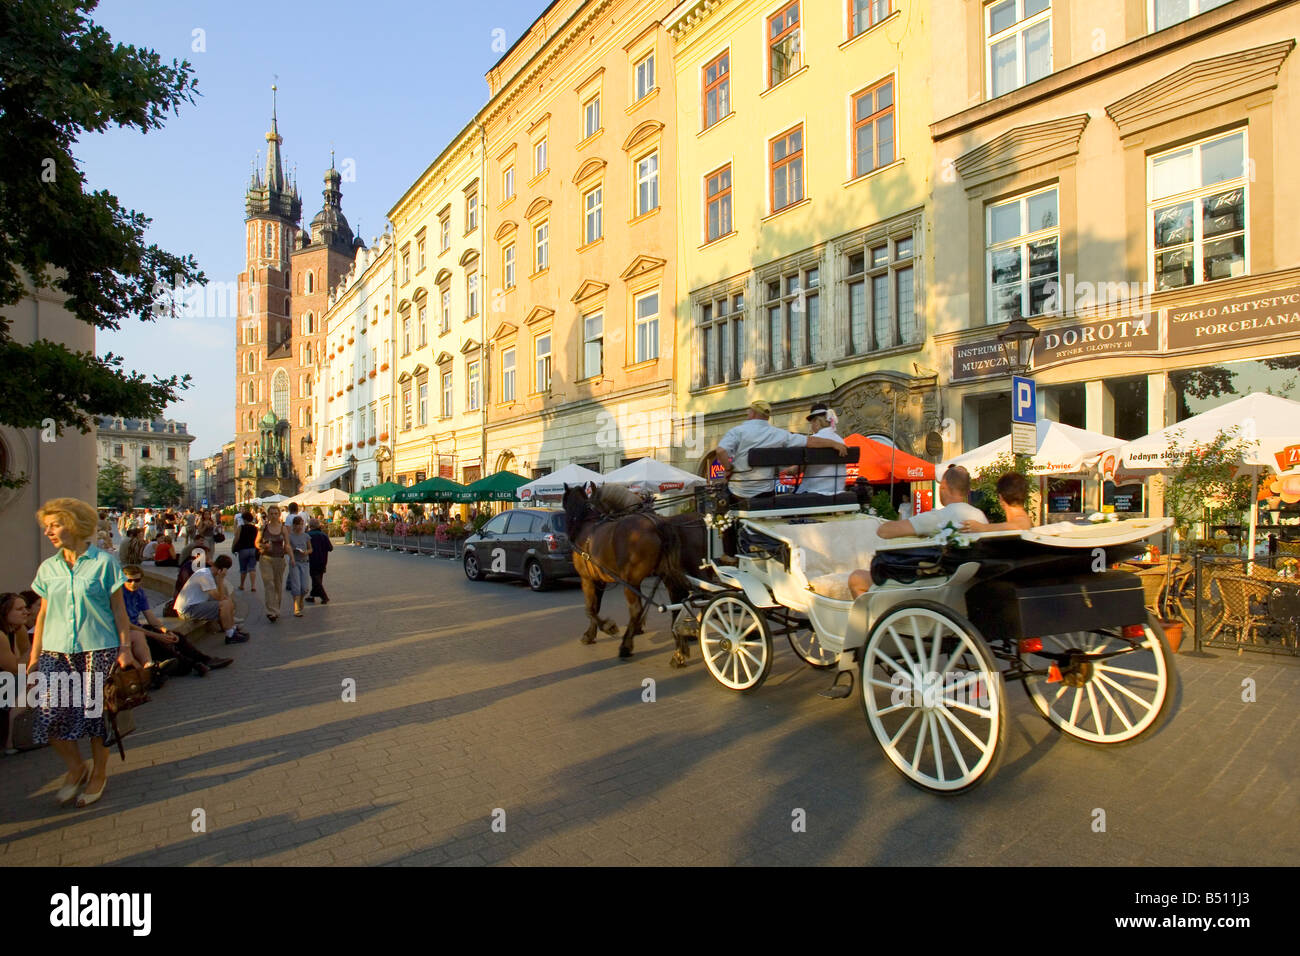 A tourist horse drawn carriage in the Main Market Square of Krakow in Poland. Stock Photo